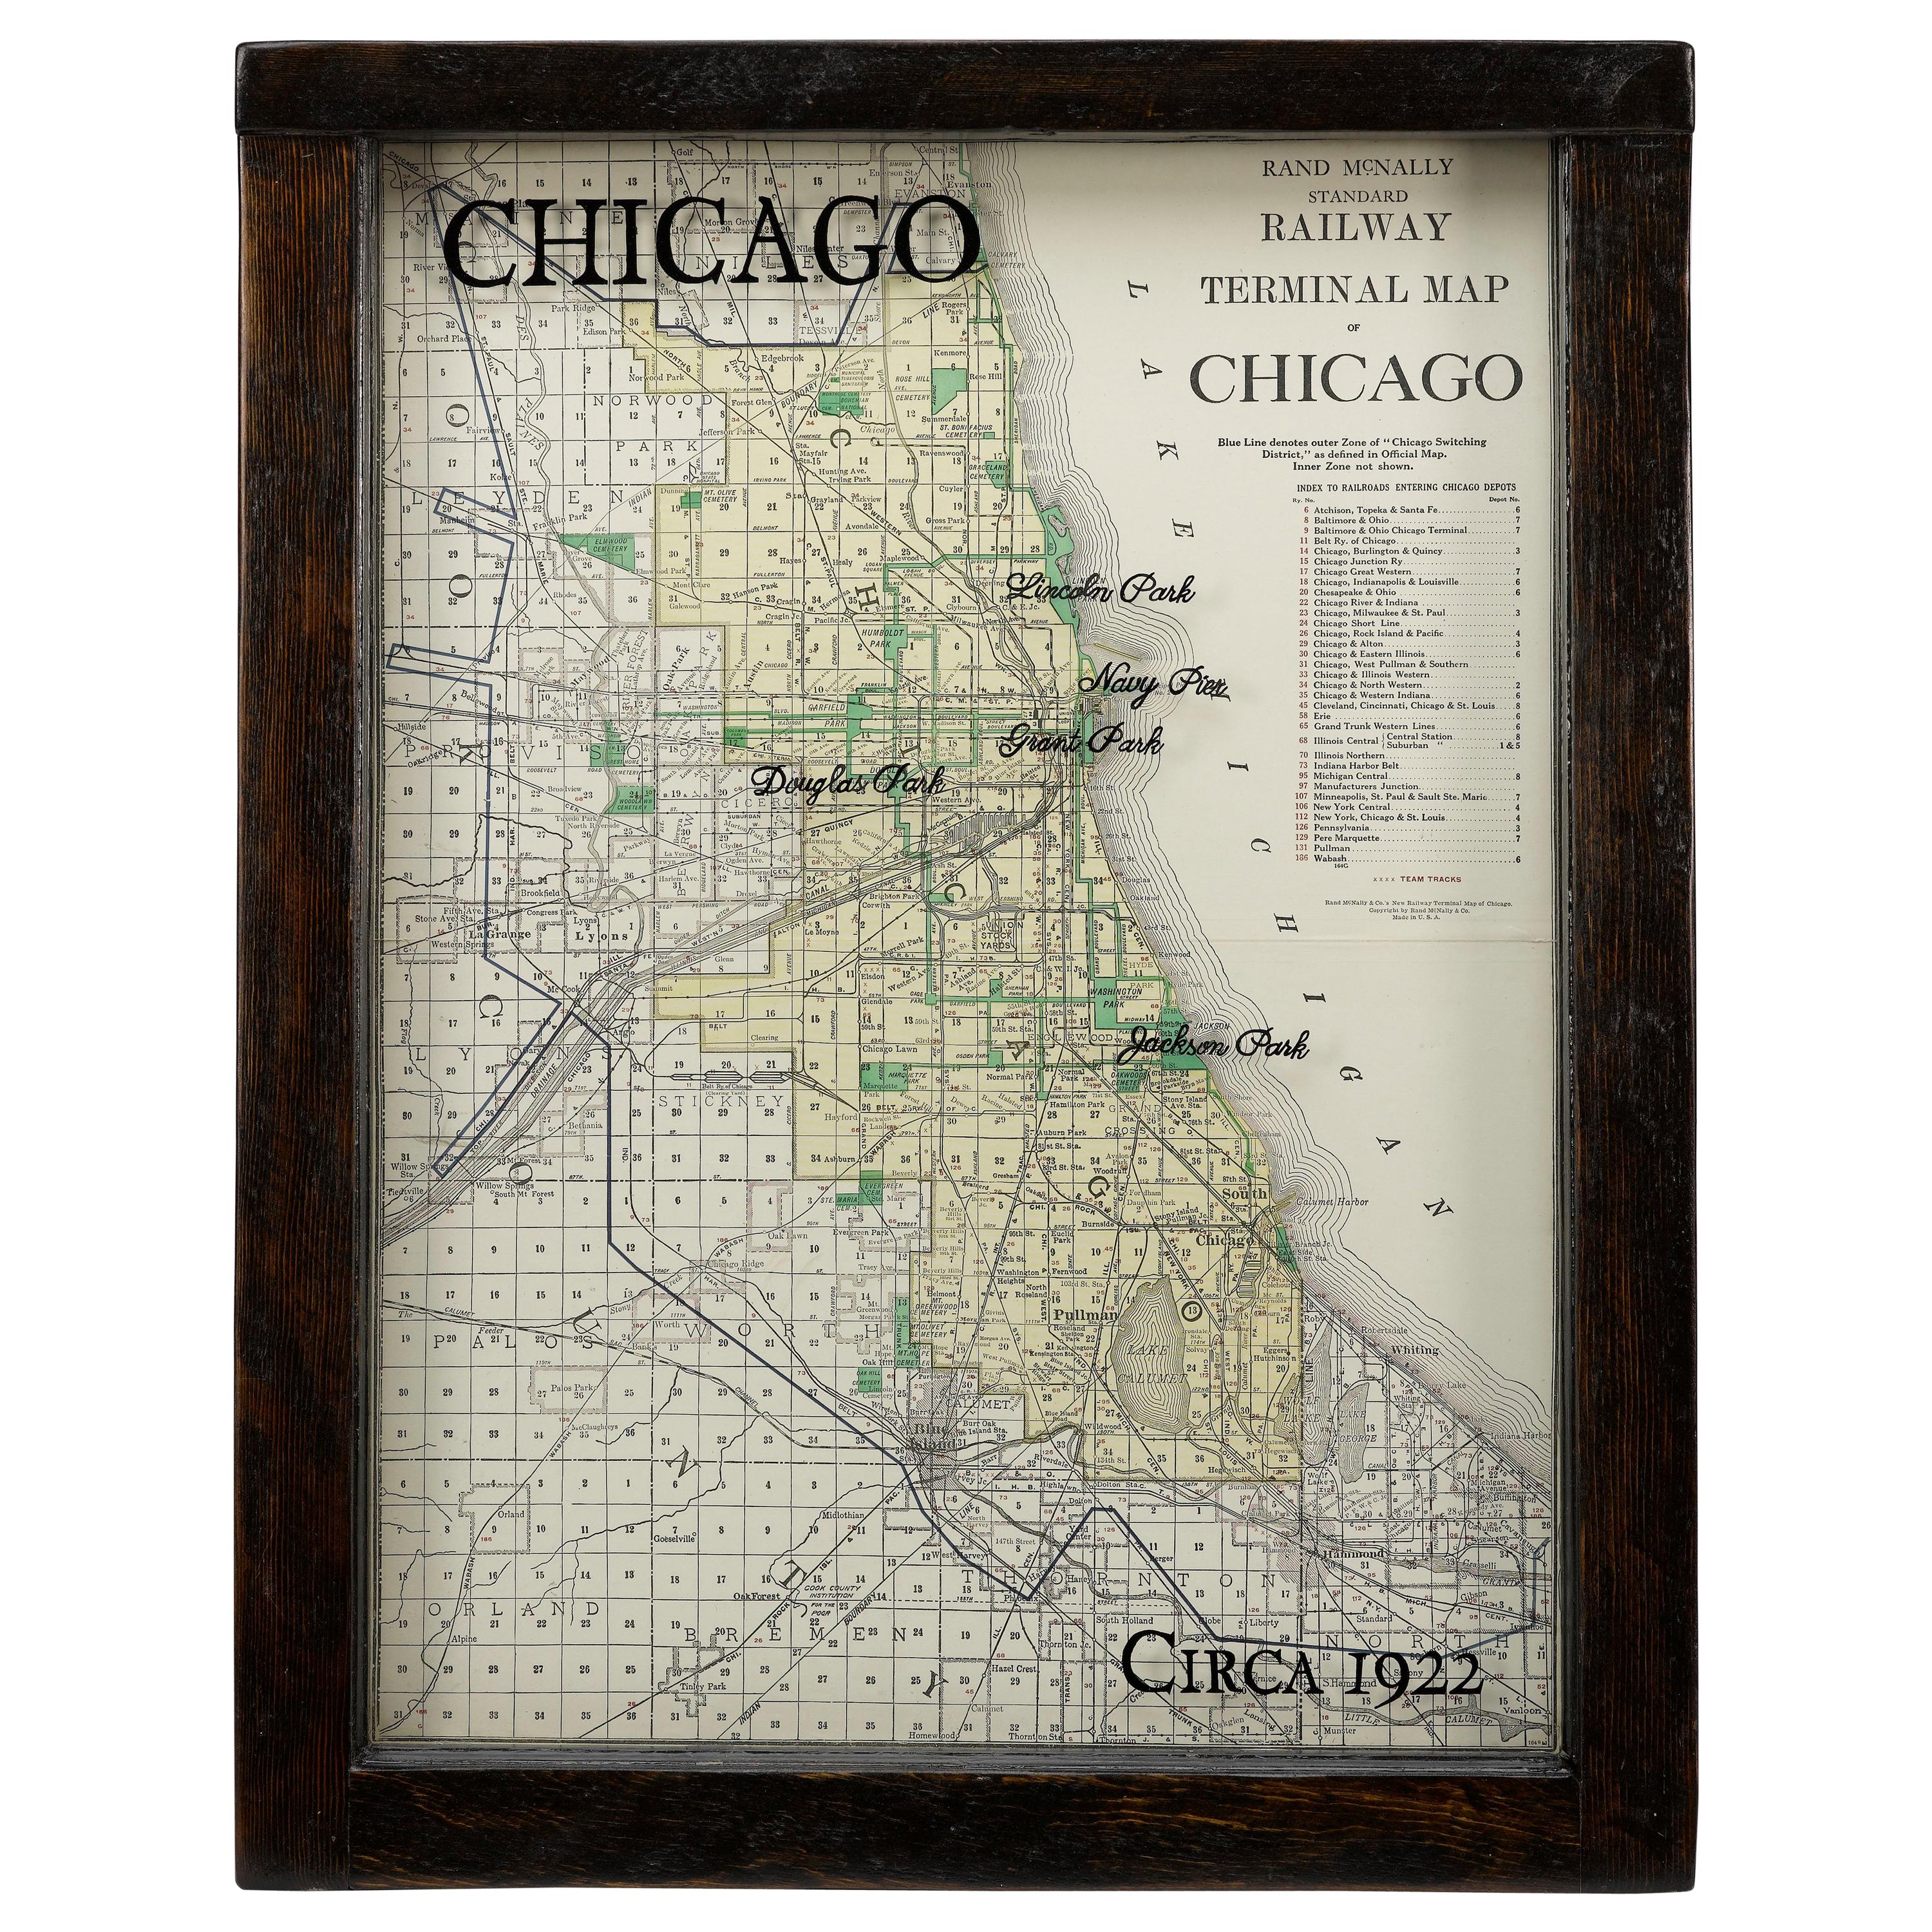 1922 Map of Chicago, Rand McNally Standard Railway Map